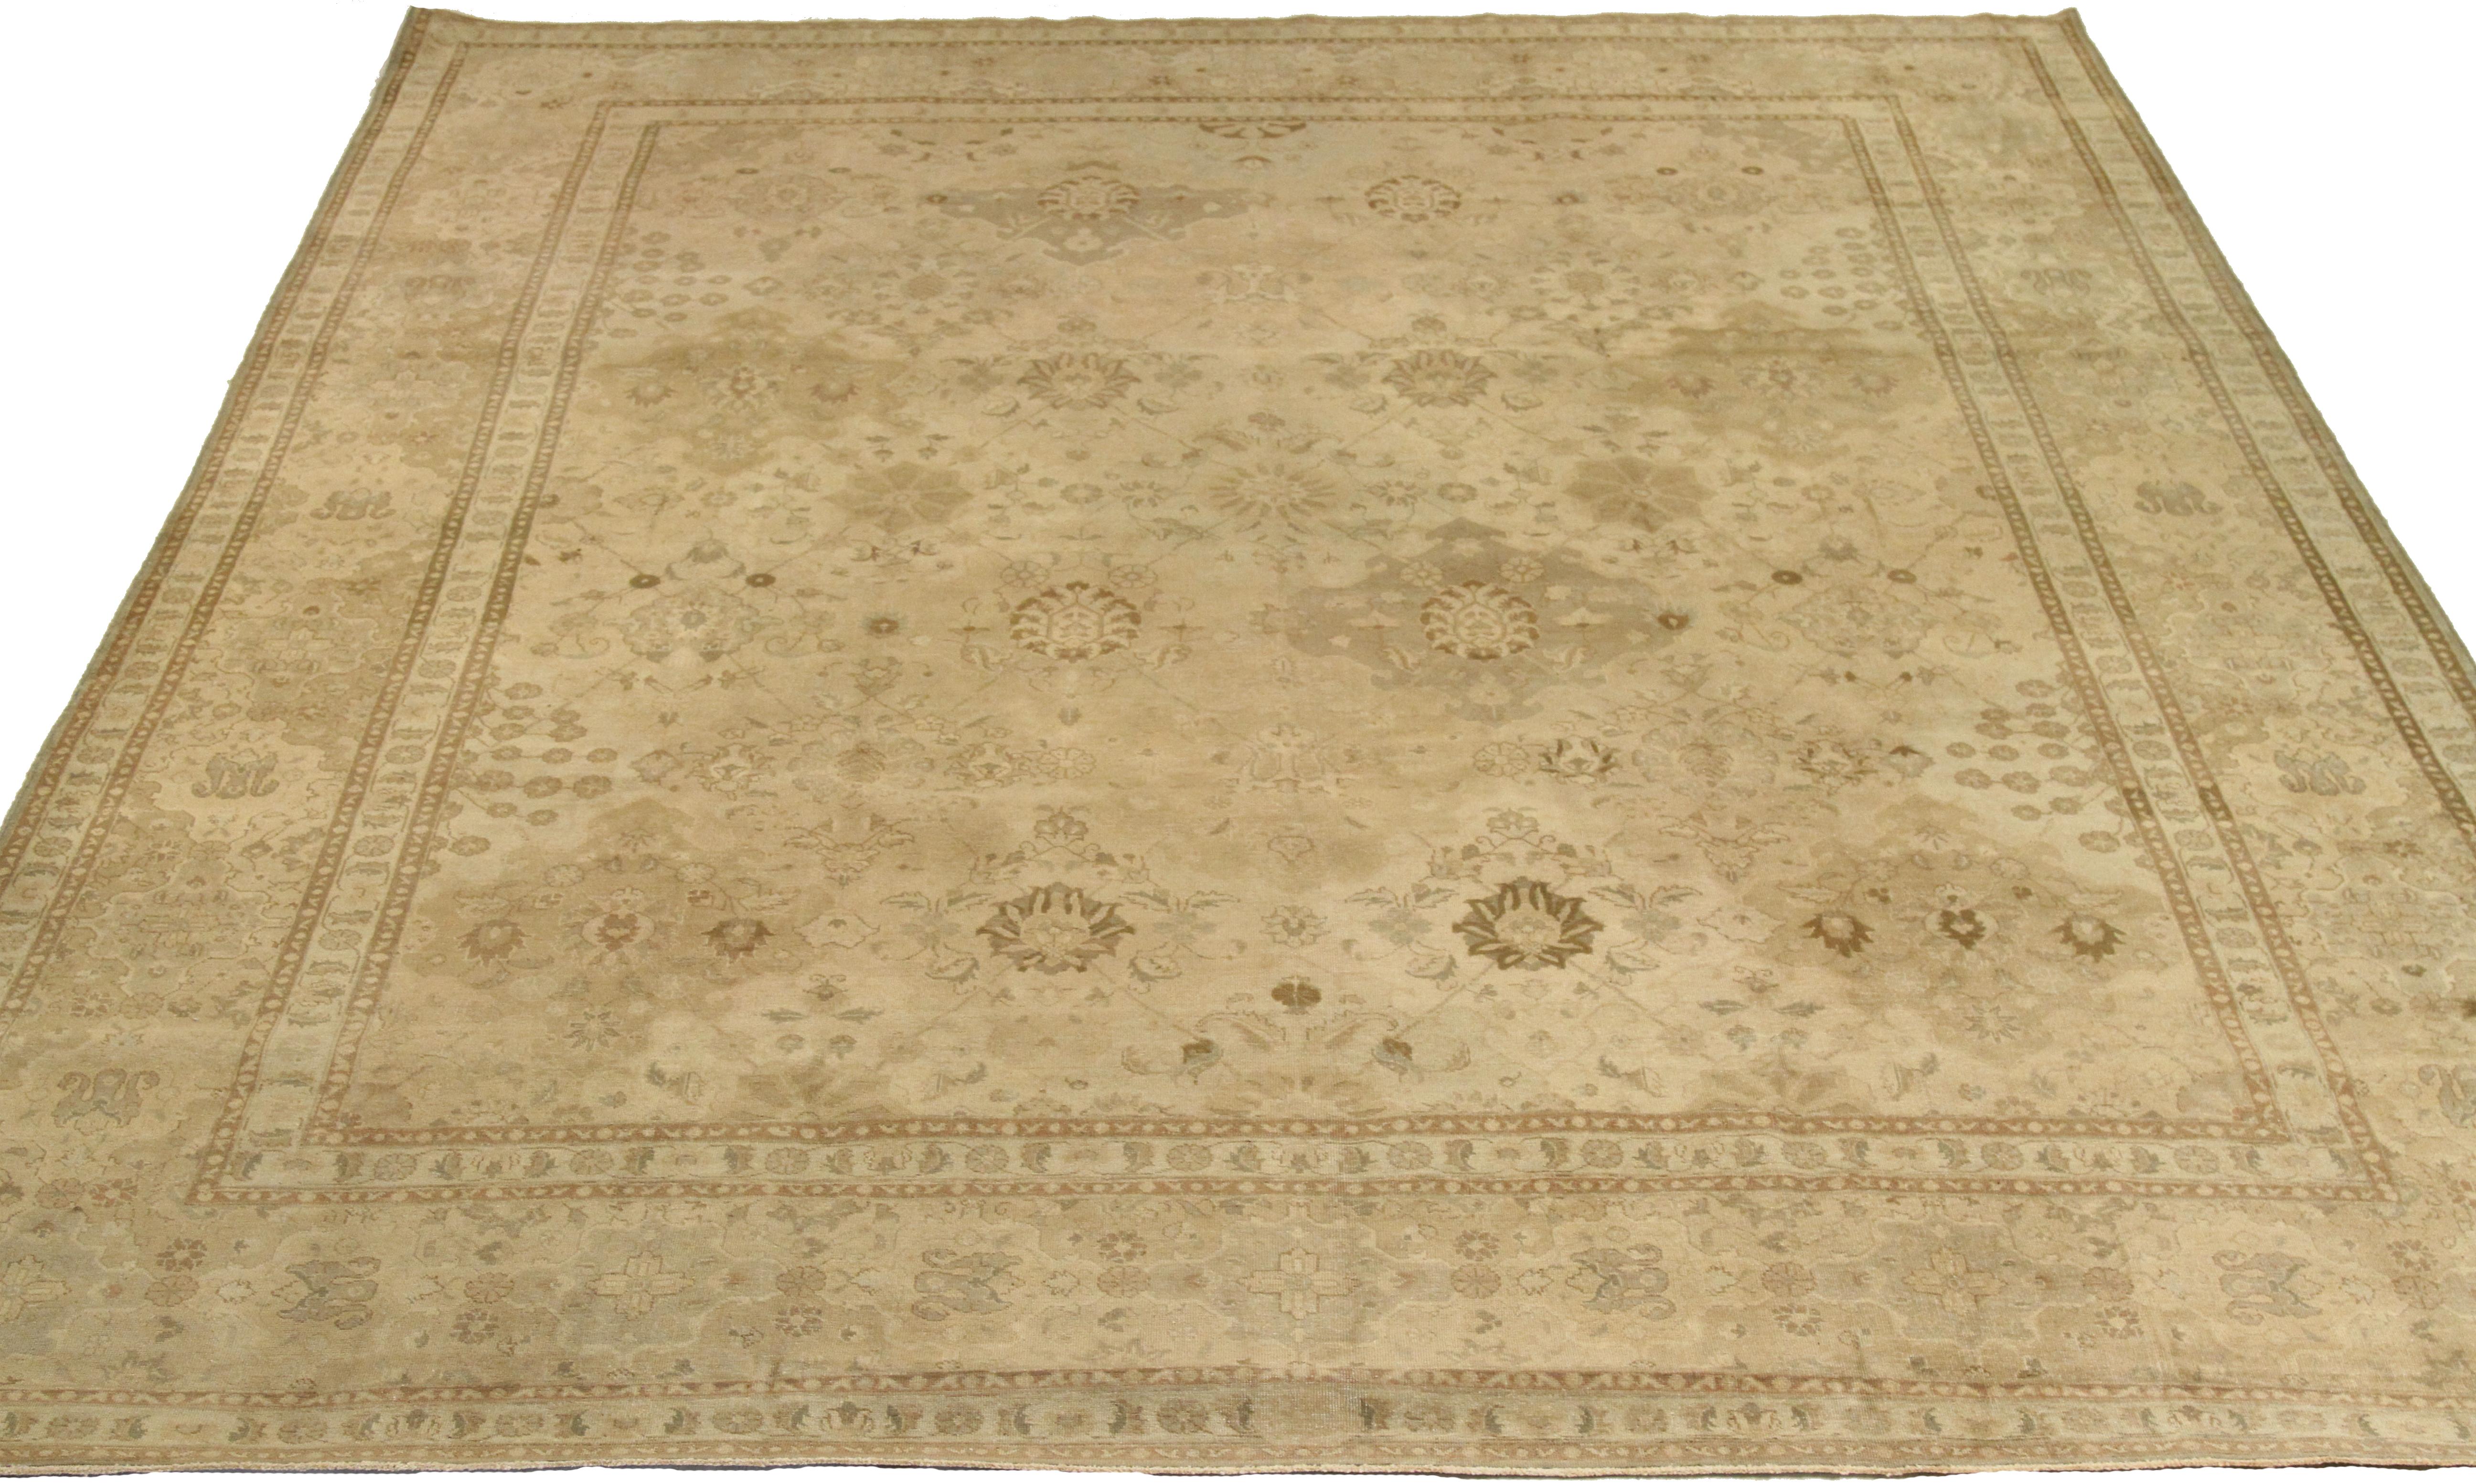 This antique mid-20th century hand-woven Persian area rug is a stunning piece made from fine wool and all-natural vegetable dyes that are safe for people and pets. The rug showcases traditional Tabriz weaving, featuring intricate botanical and